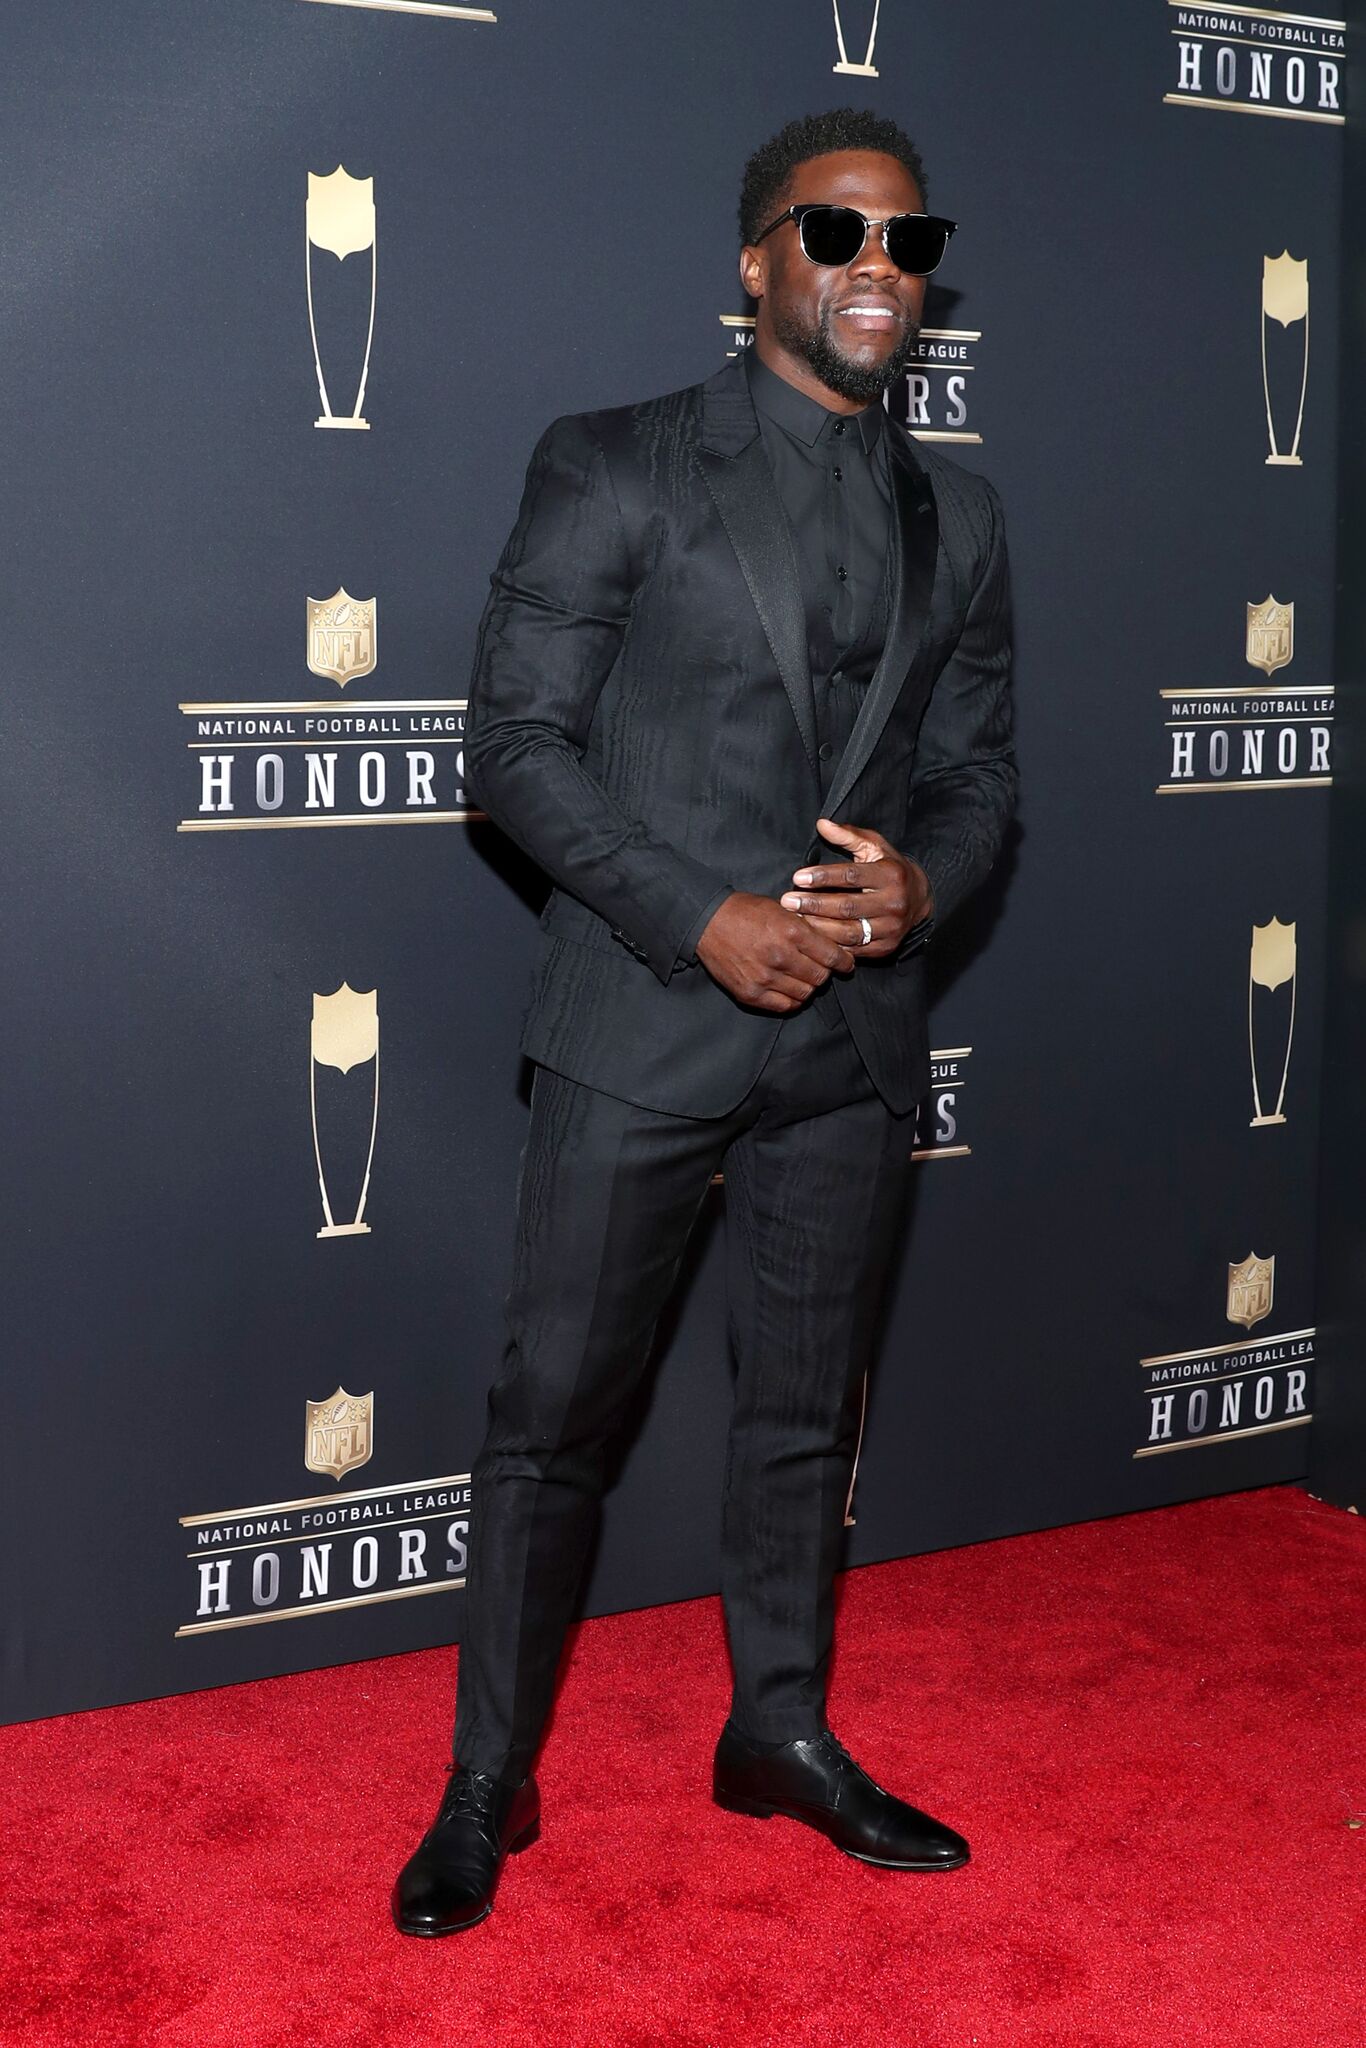 Comedian Kevin Hart attends the NFL Honors at University of Minnesota on February 3, 2018 in Minneapolis, Minnesota. l  Getty Images